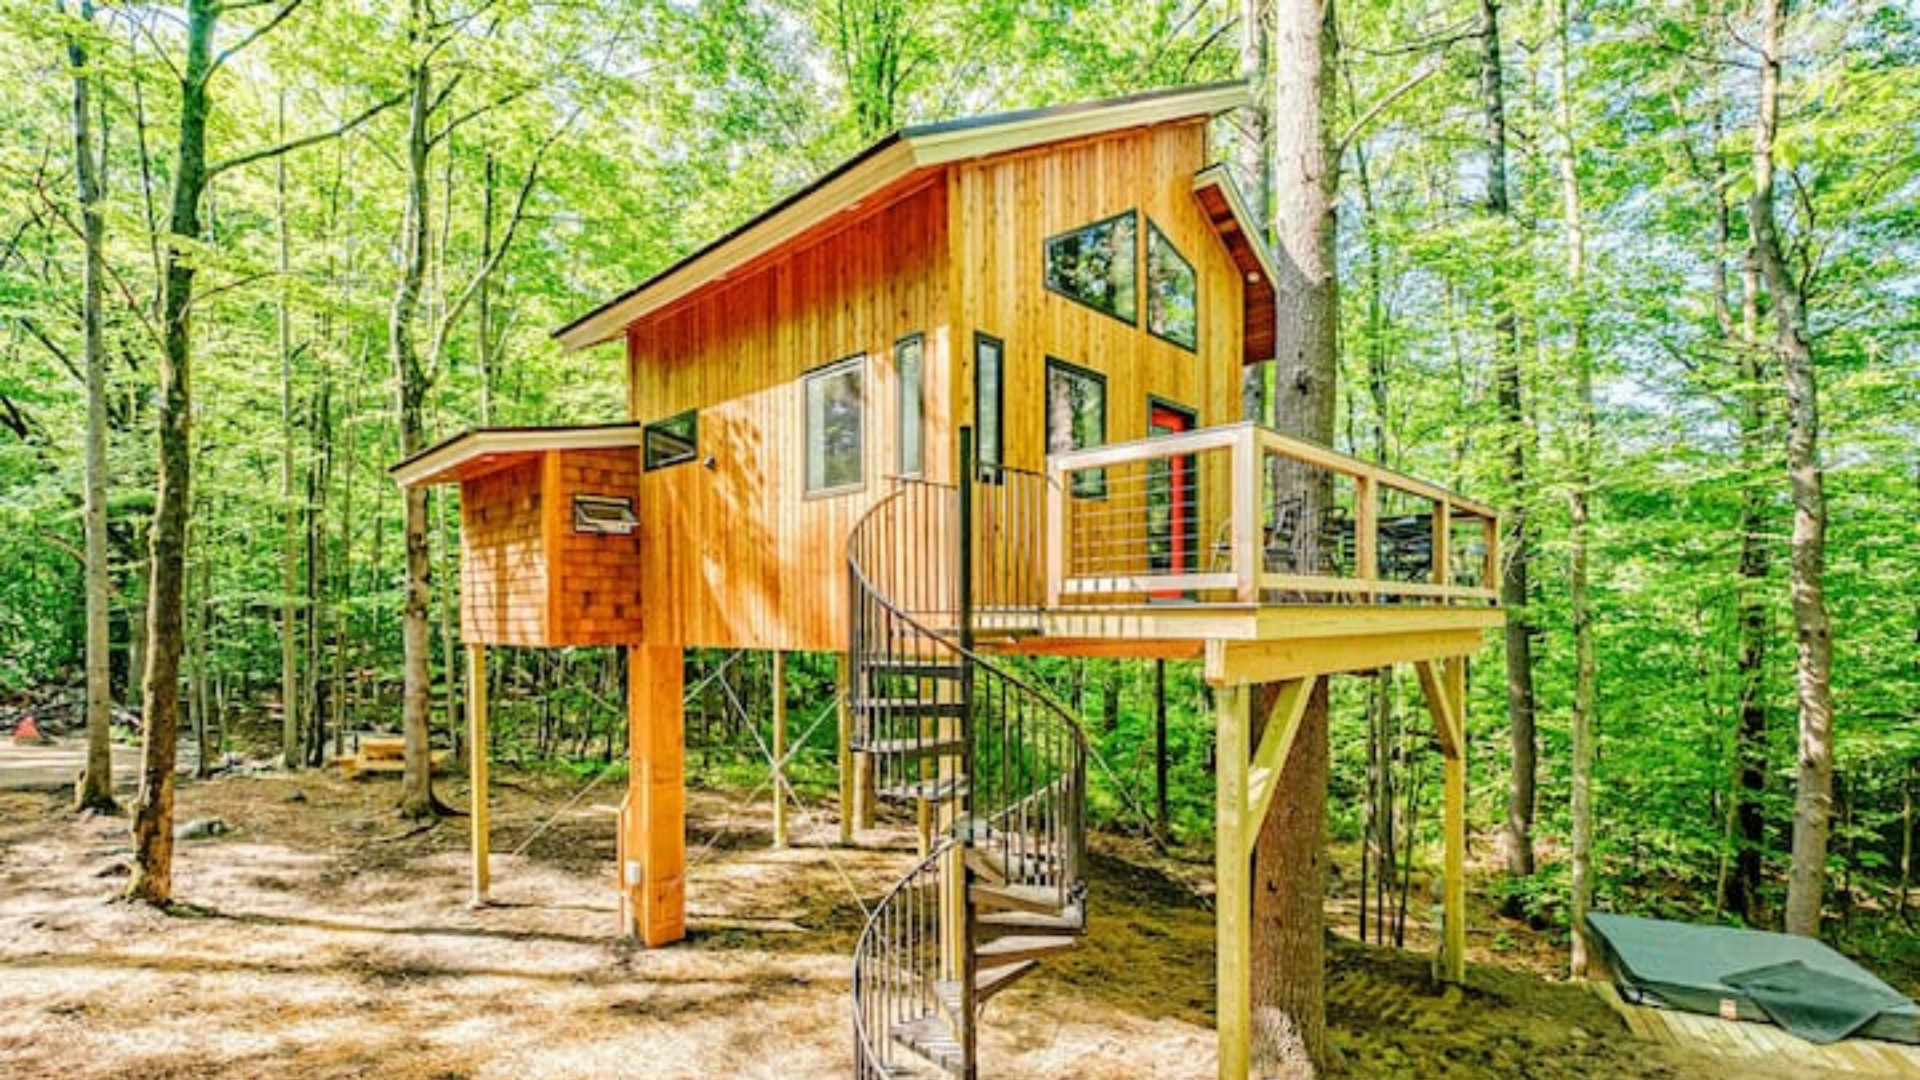 For $395 a night you can rent a treehouse in the Springvale woods that sleeps four. It sits just uphill of Littlefield Pond.